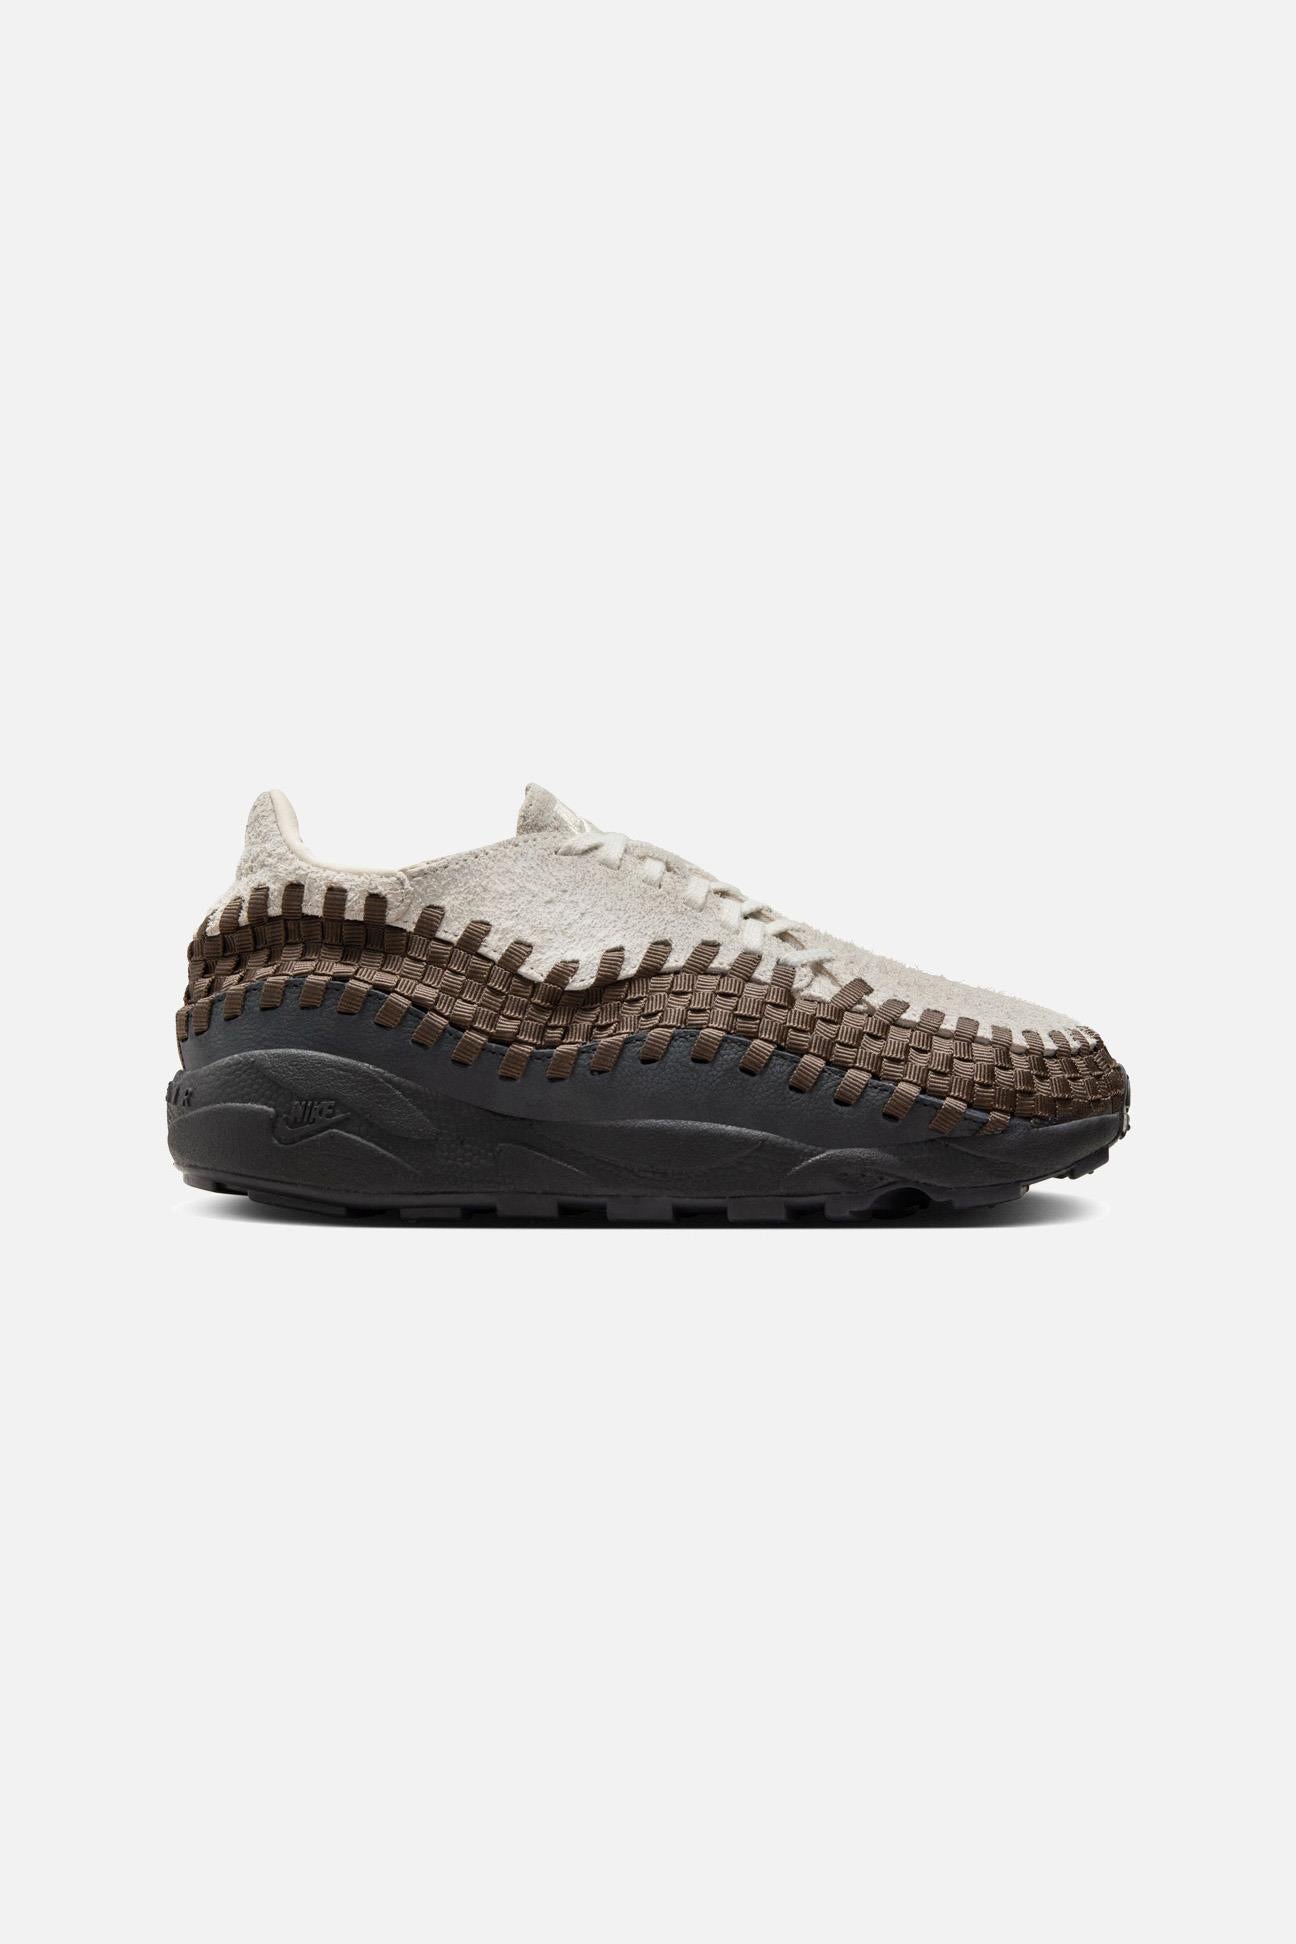 Air Footscape Woven 